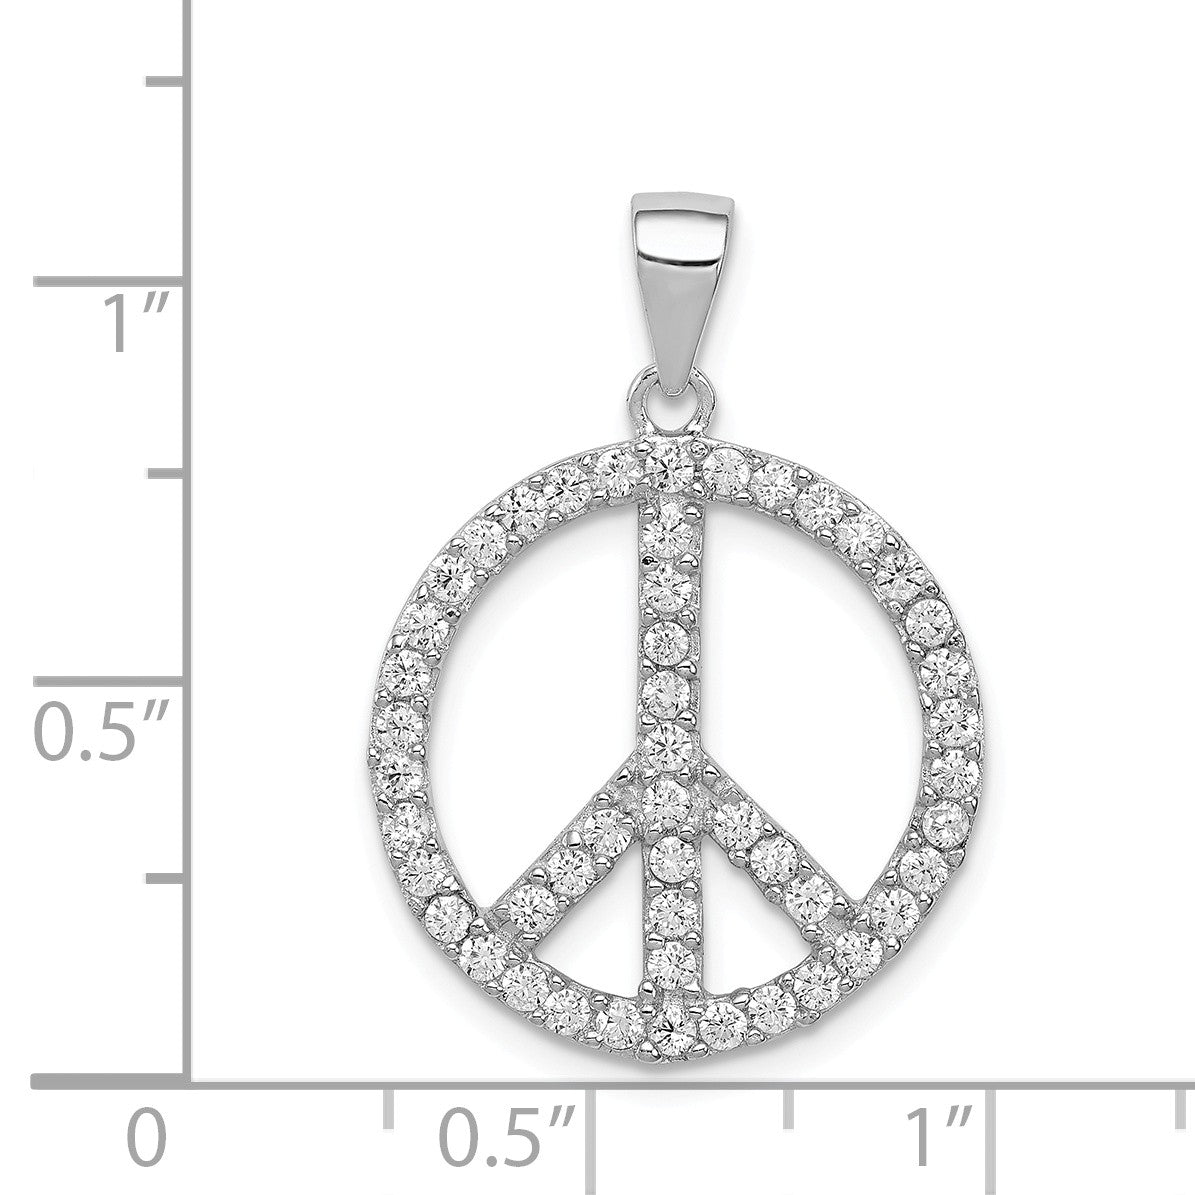 Alternate view of the Sterling Silver and Cubic Zirconia Peace Sign Pendant, 19mm by The Black Bow Jewelry Co.